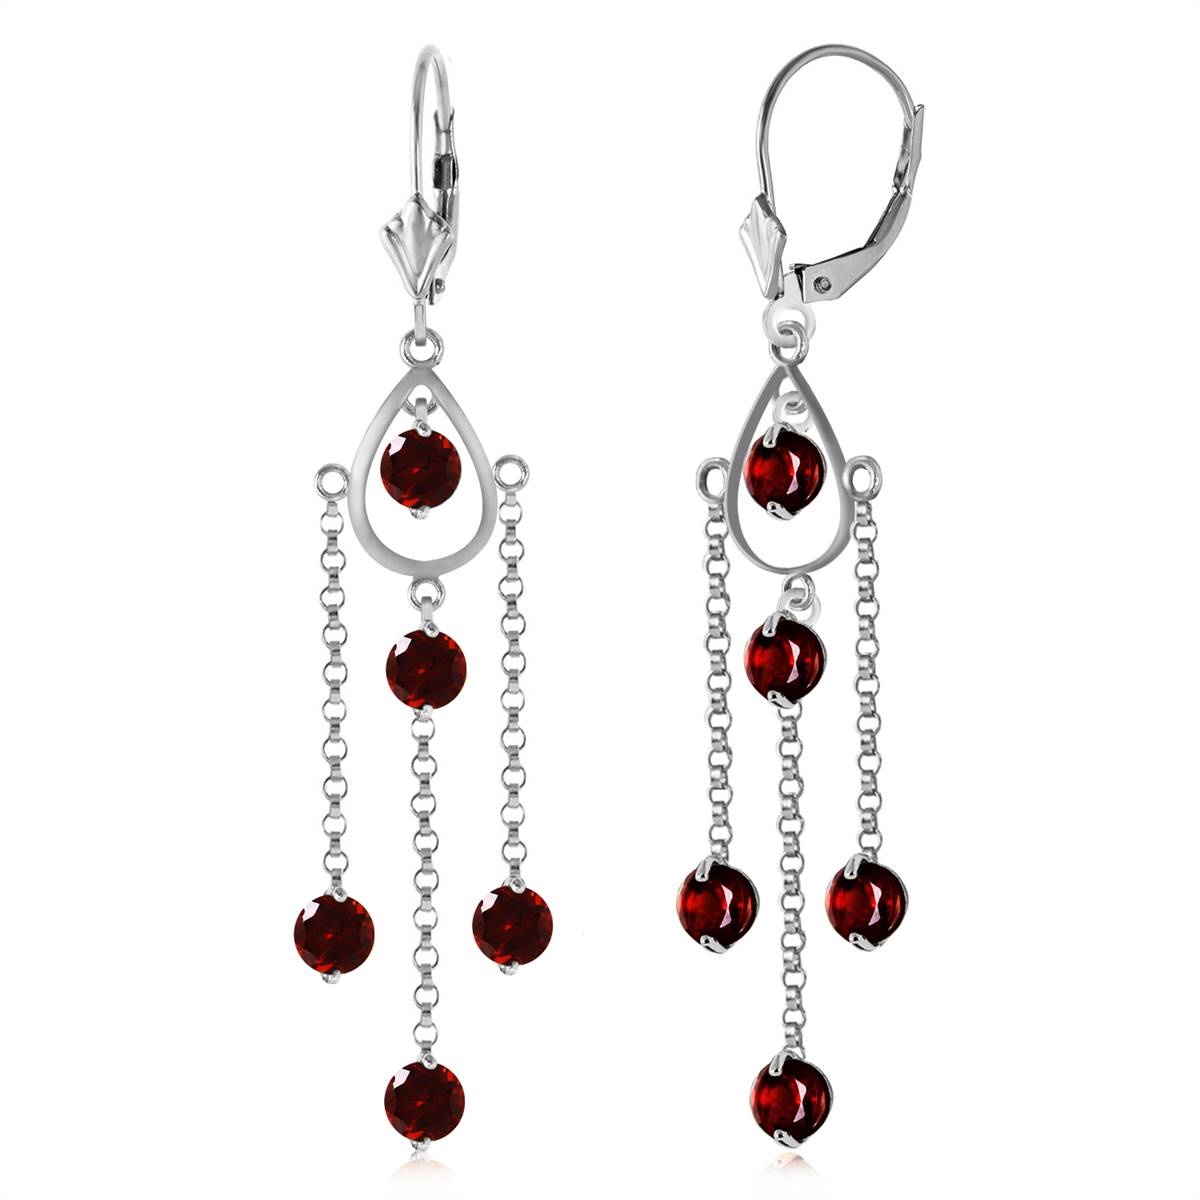 3 Carat 14K Solid White Gold No Absolute Completion Garnet Earrings